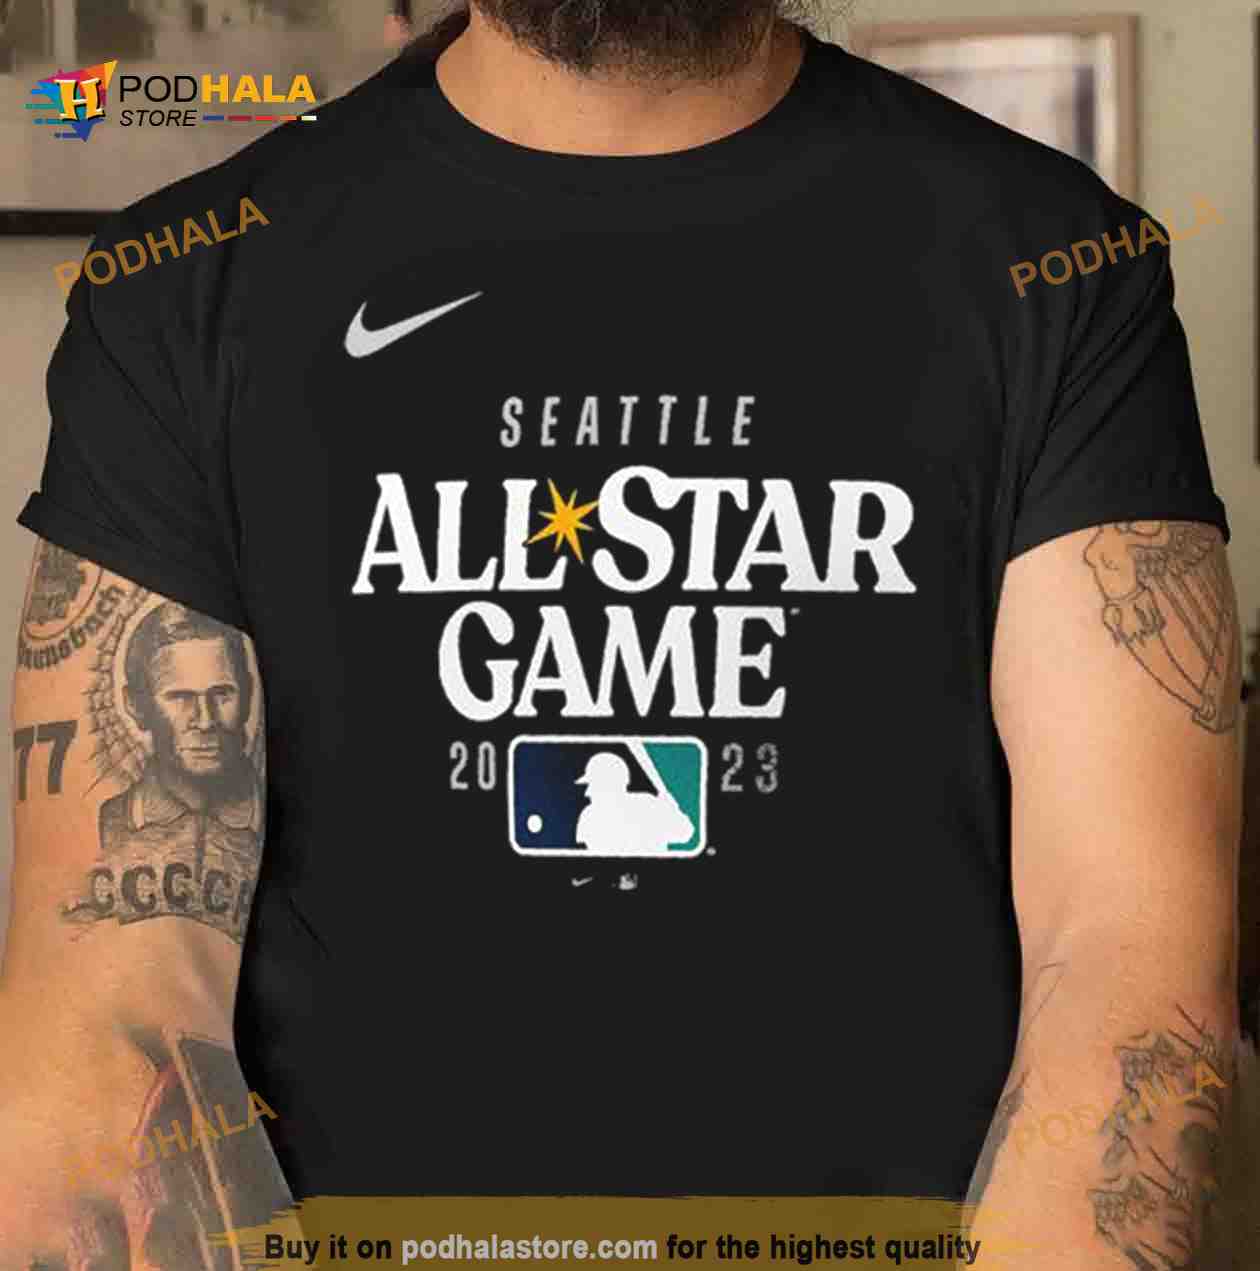 Seattle Mariners All-Star Game MLB Shirts for sale